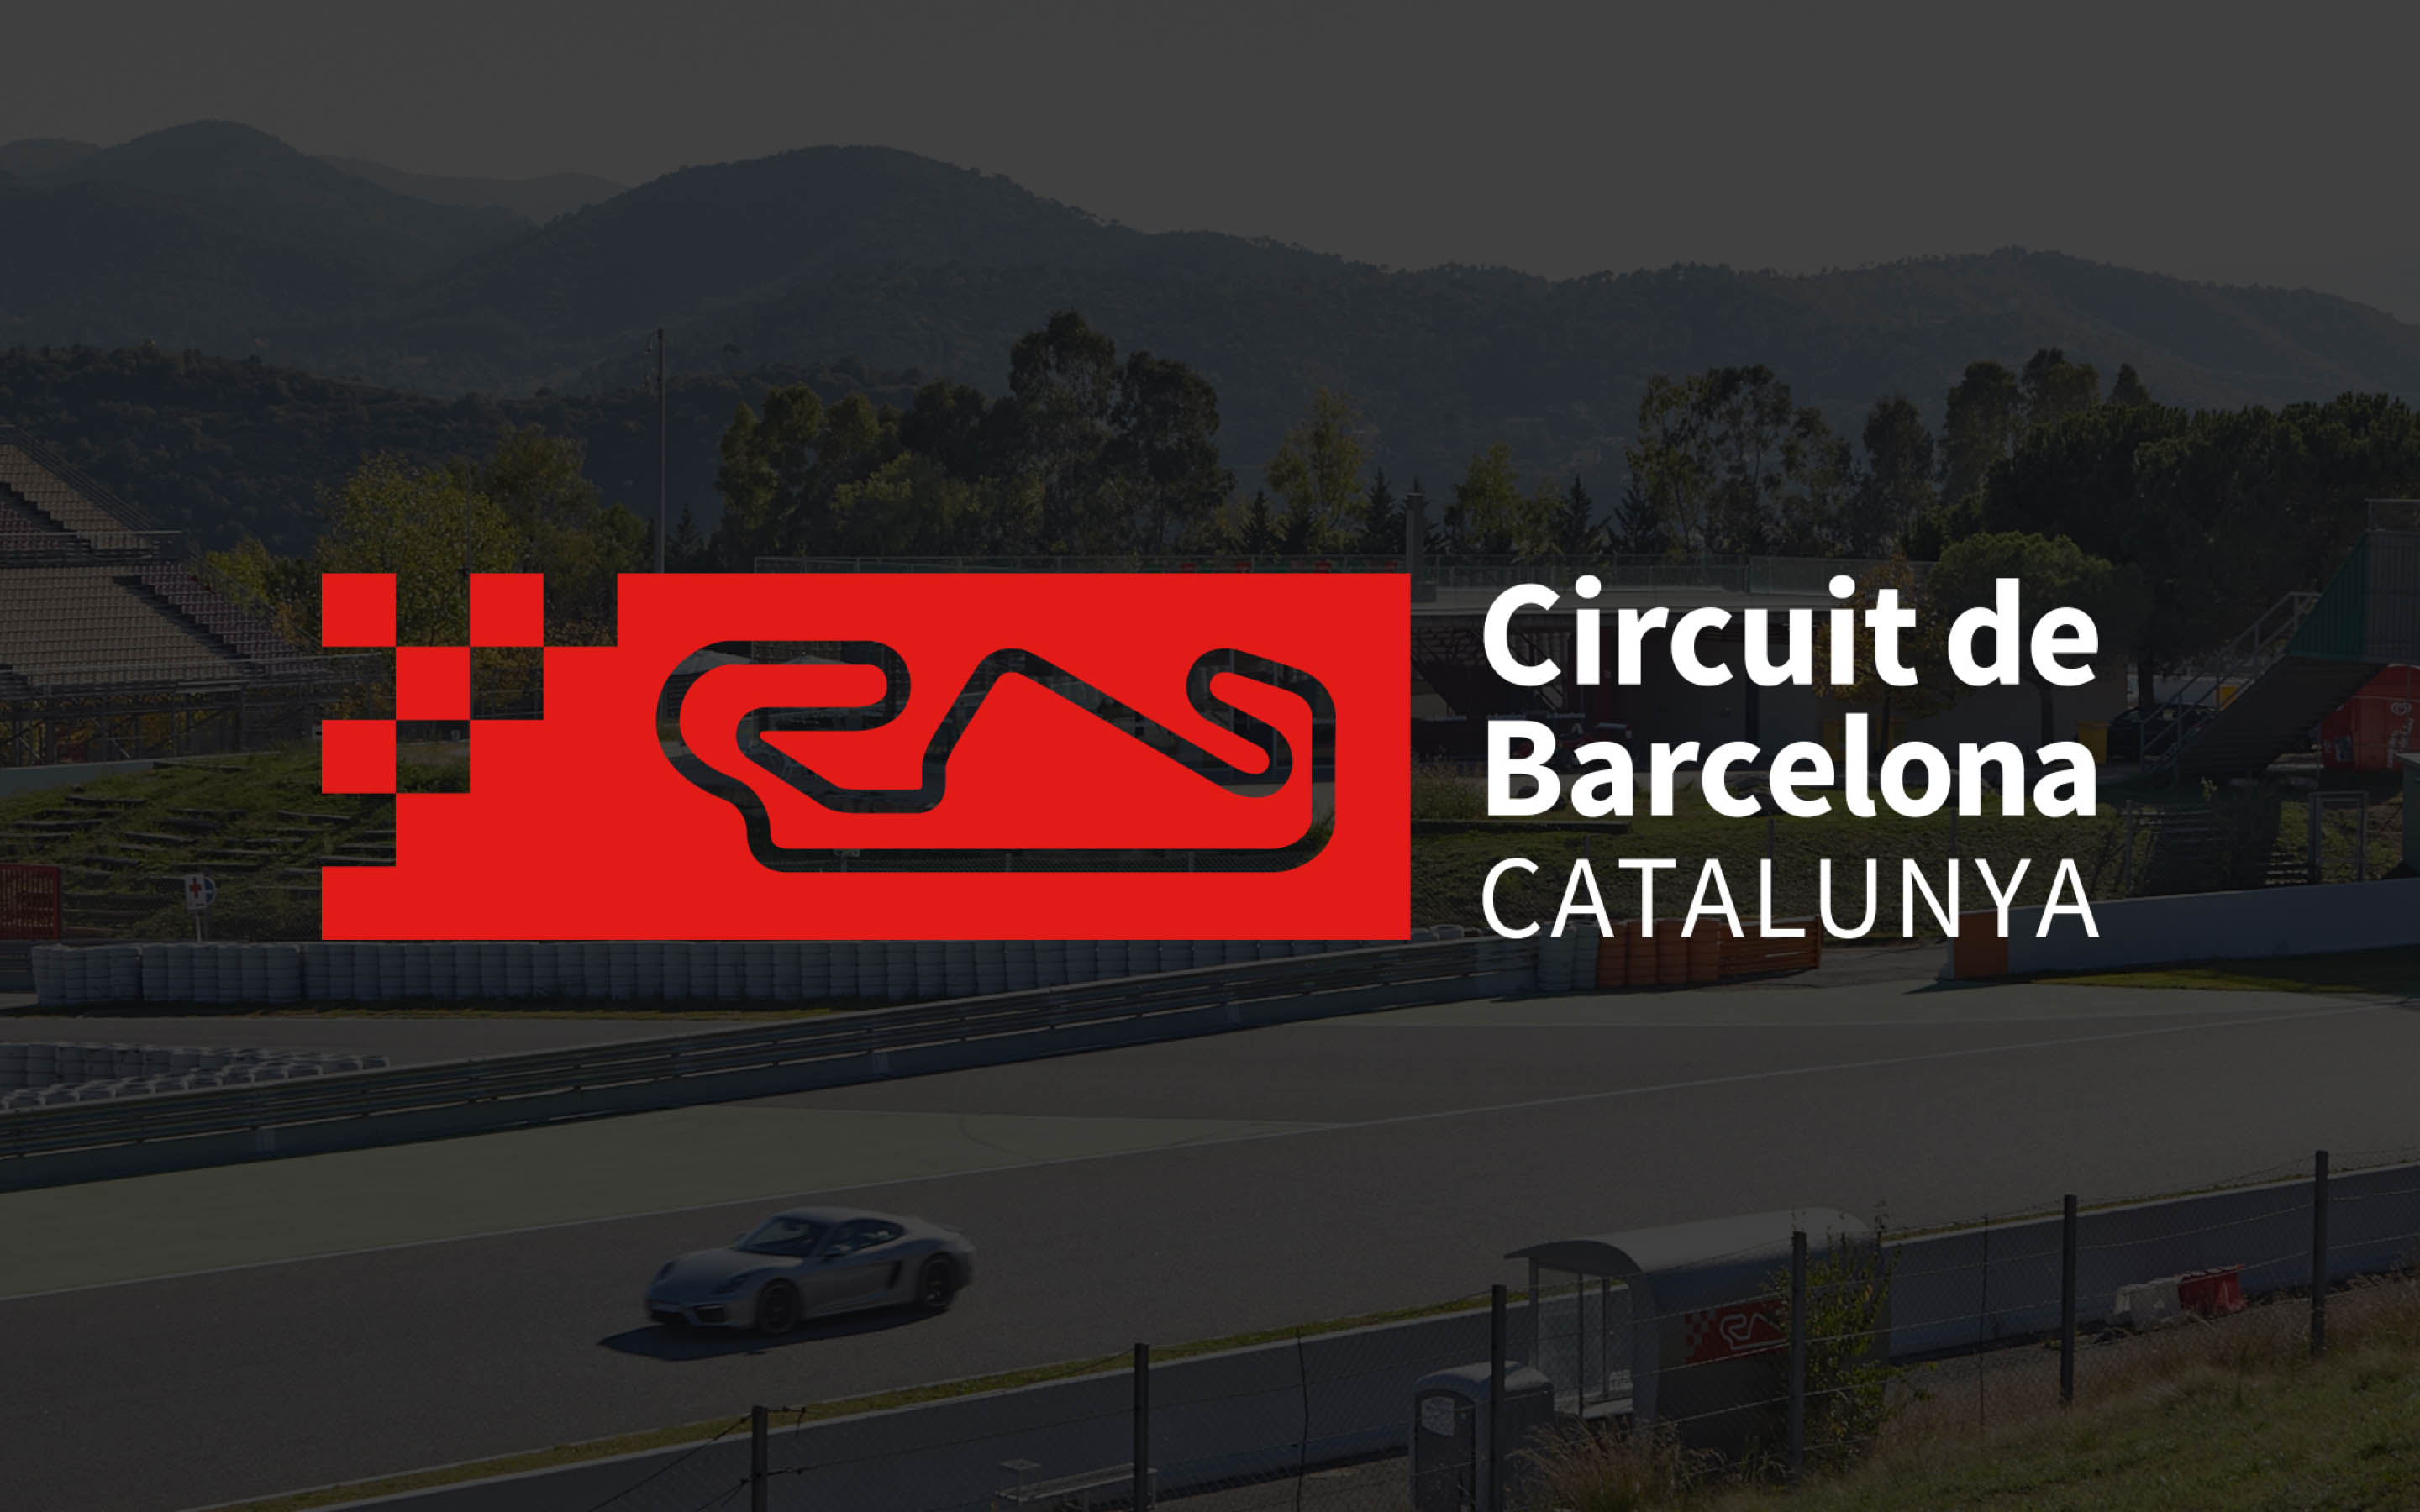 Since its inauguration in 1991, Circuit de Barcelona-Catalunya has been one of the world’s most emblematic motor racing tracks, hosting competitions such as the Spanish F1 Grand Prix and the Catalan Motorcycle Grand Prix.
